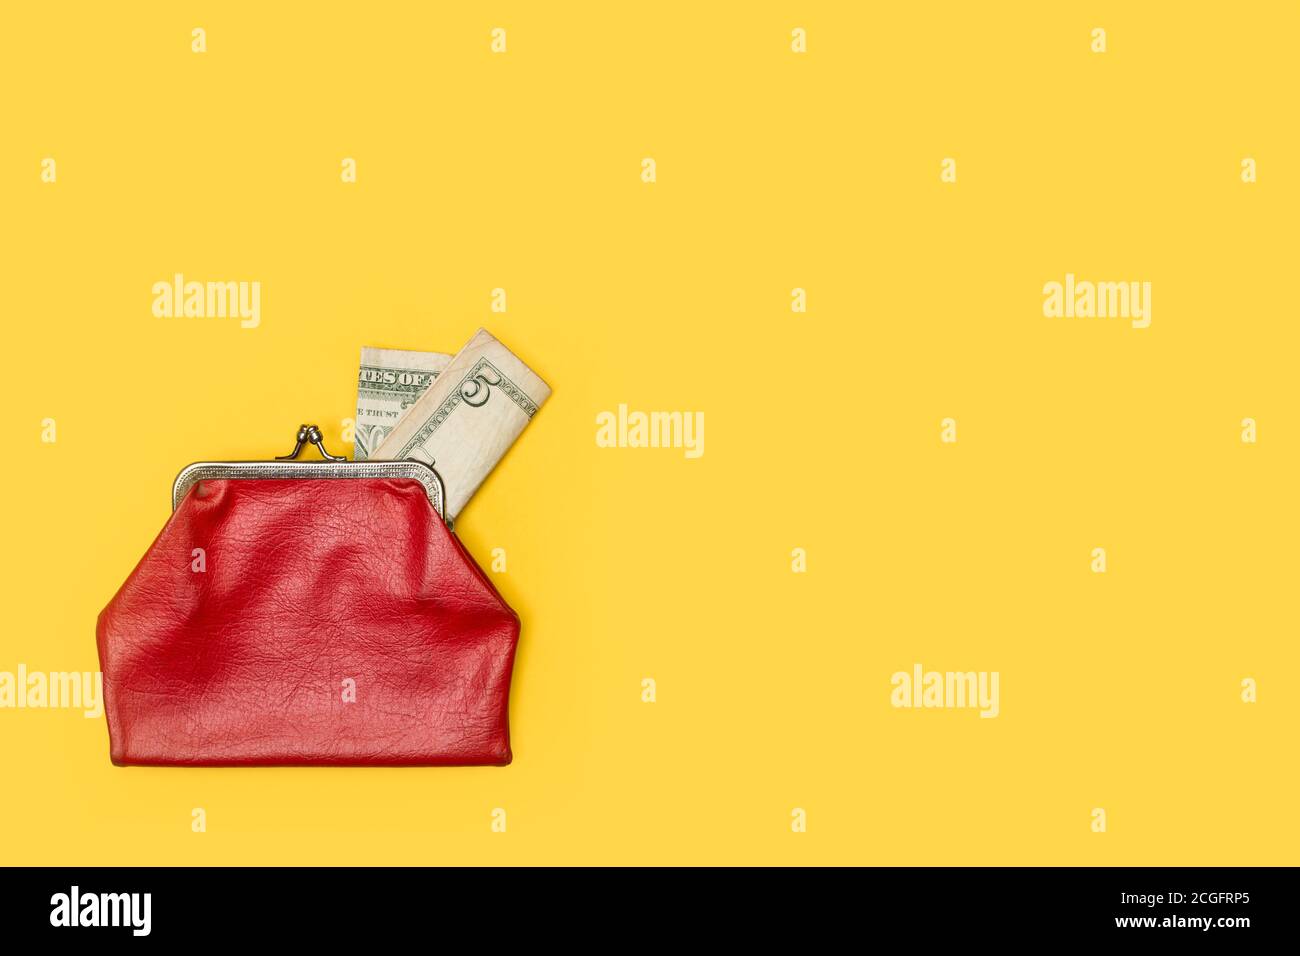 Old red coin purse with a five dollar note on a yellow background Stock Photo